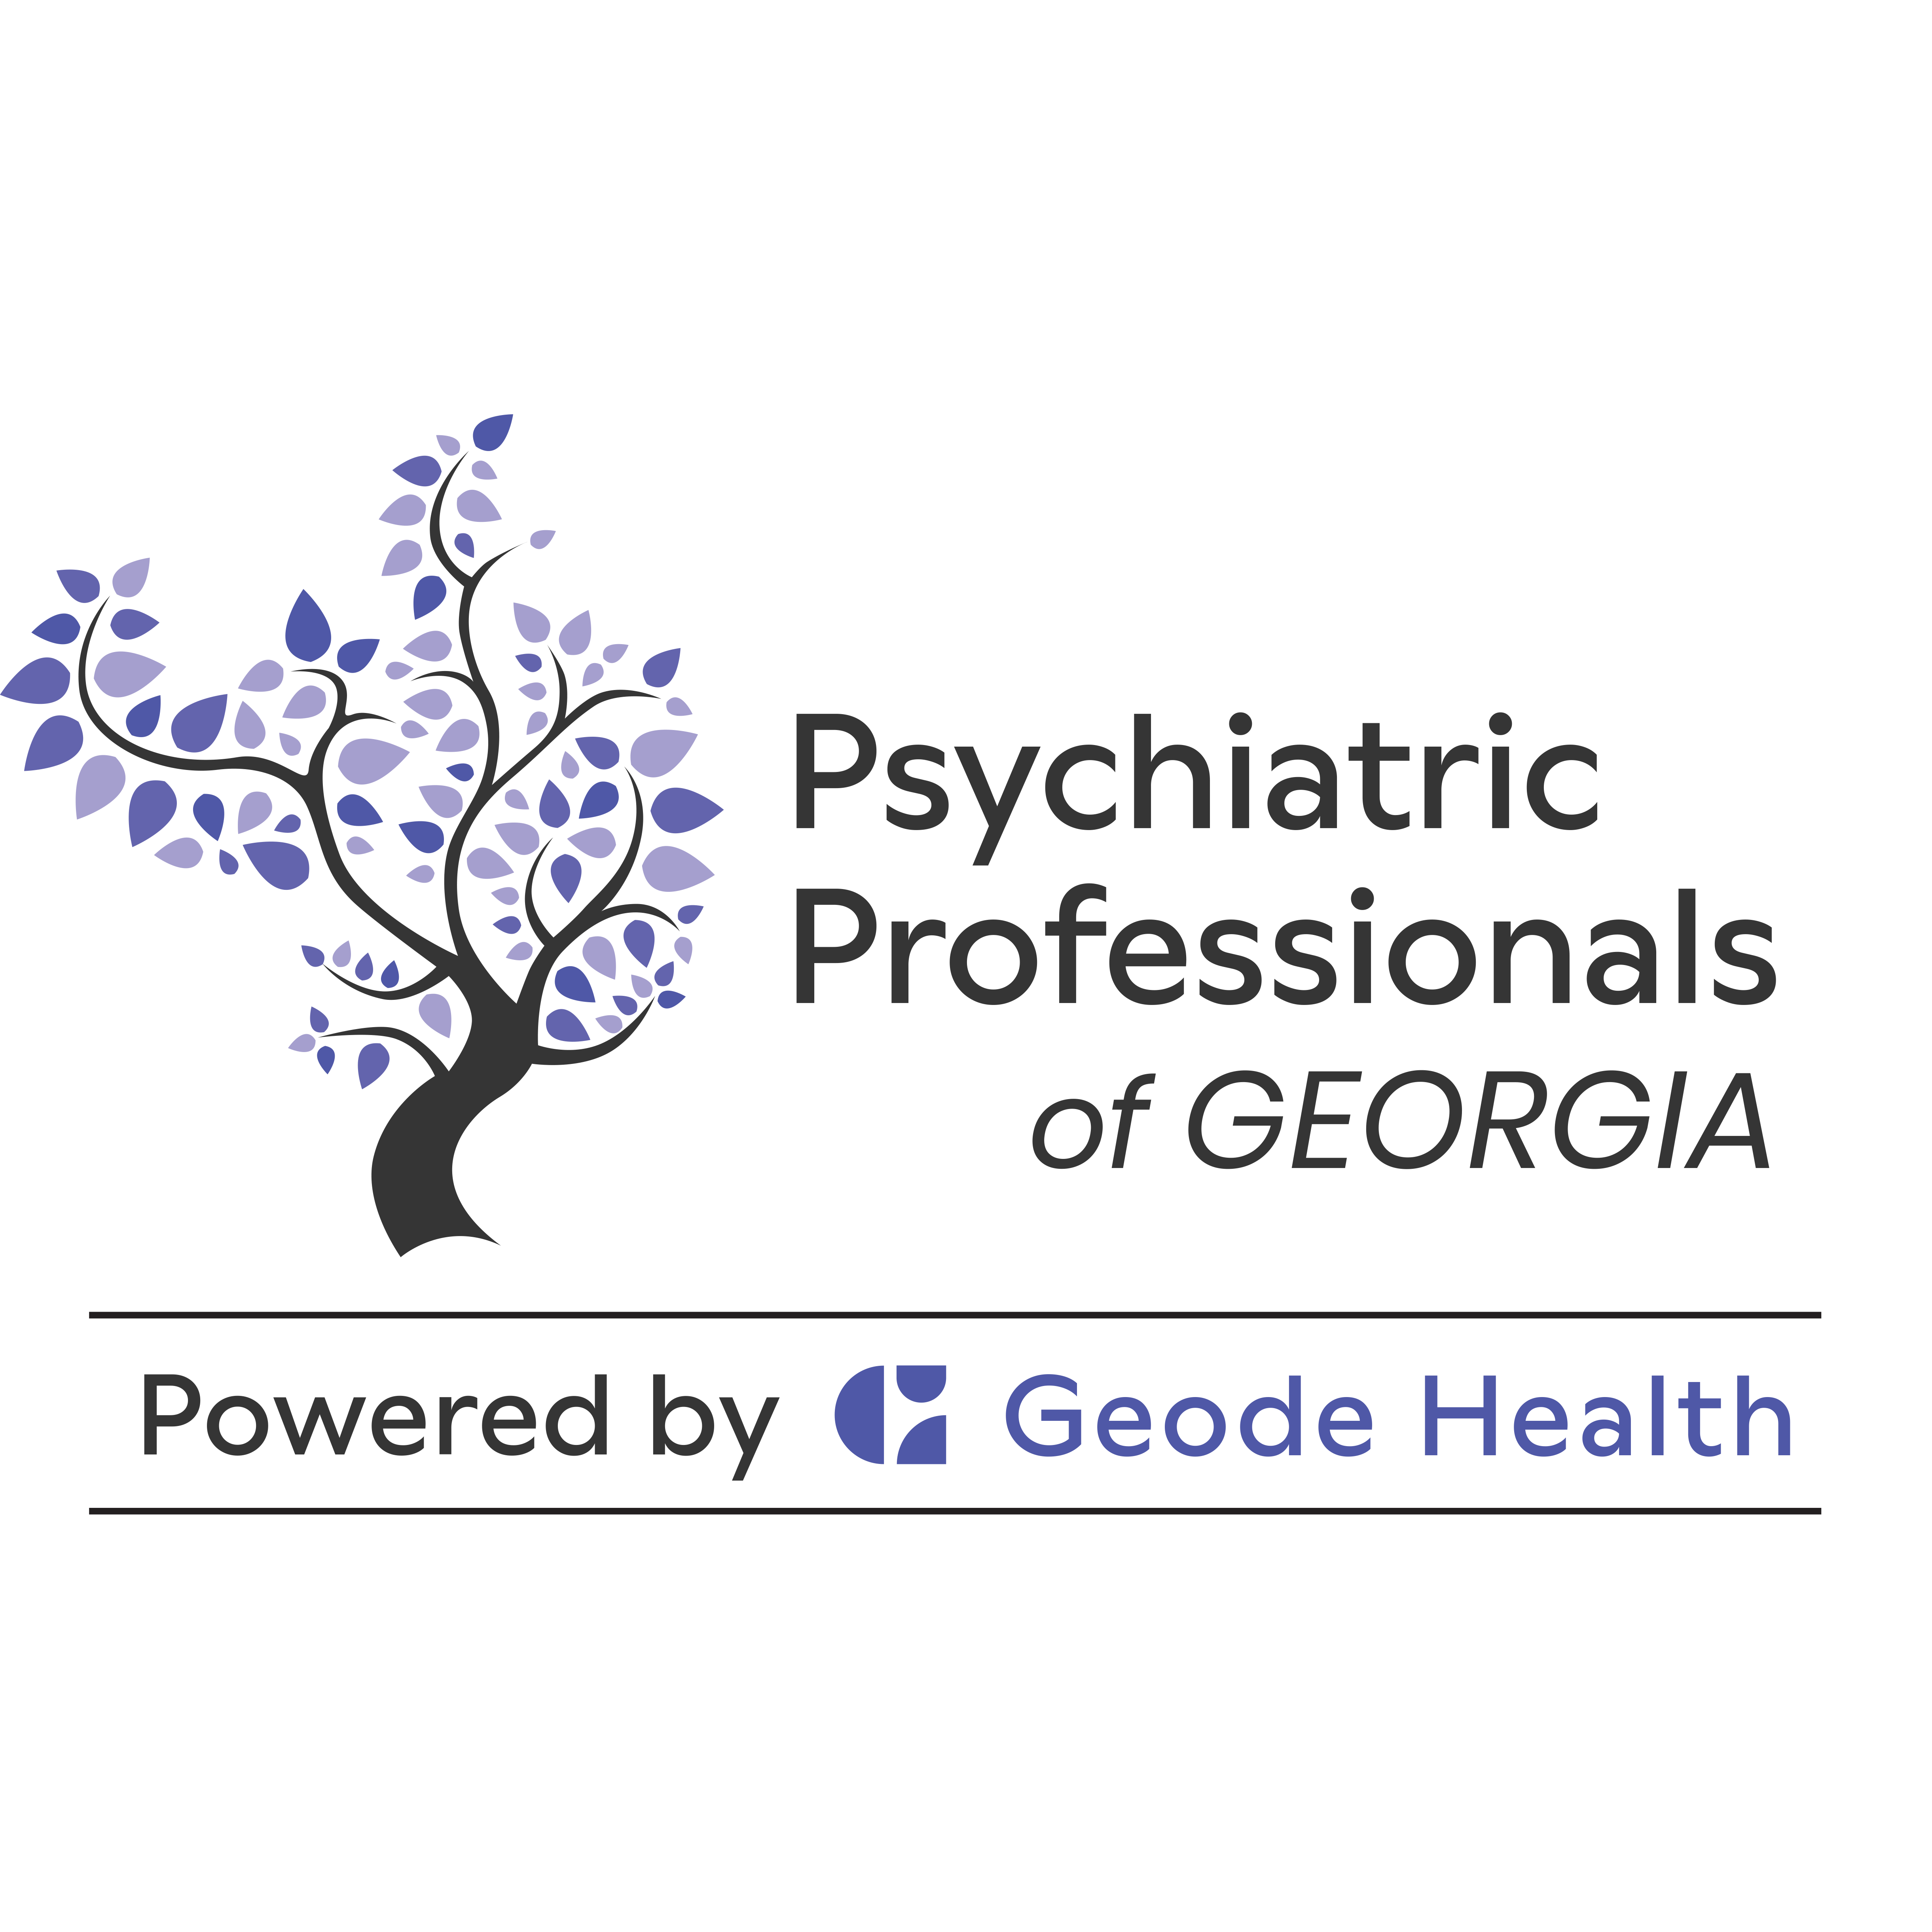 Psychiatric Professionals of Georgia, powered by Geode Health